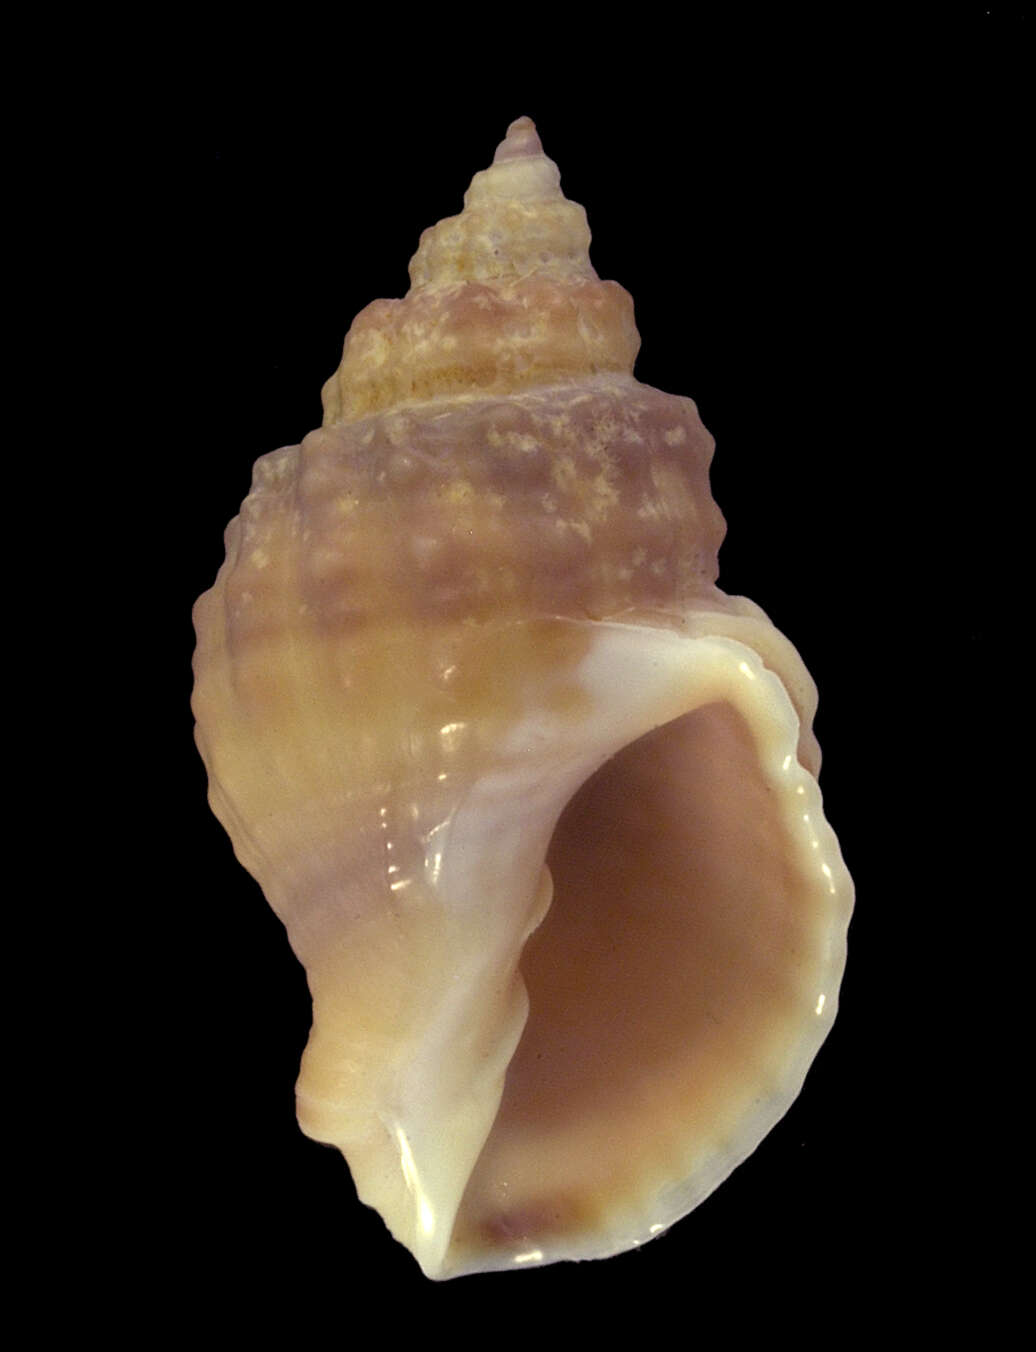 Image of neogastropods: whelks & cone shells